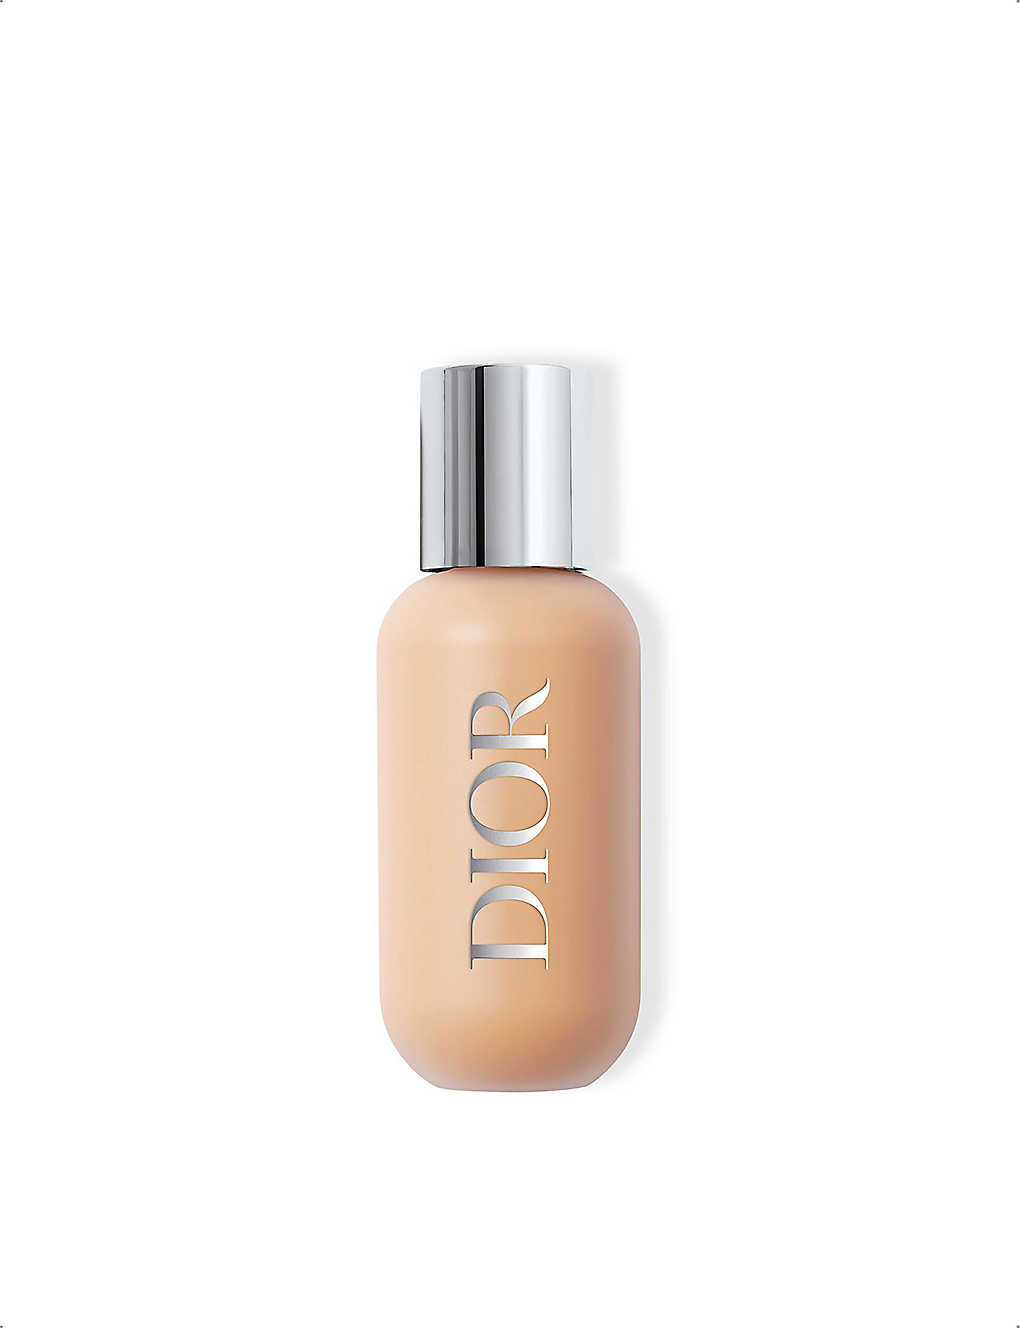 Dior Backstage Face & Body Foundation 50ml In 3.5n